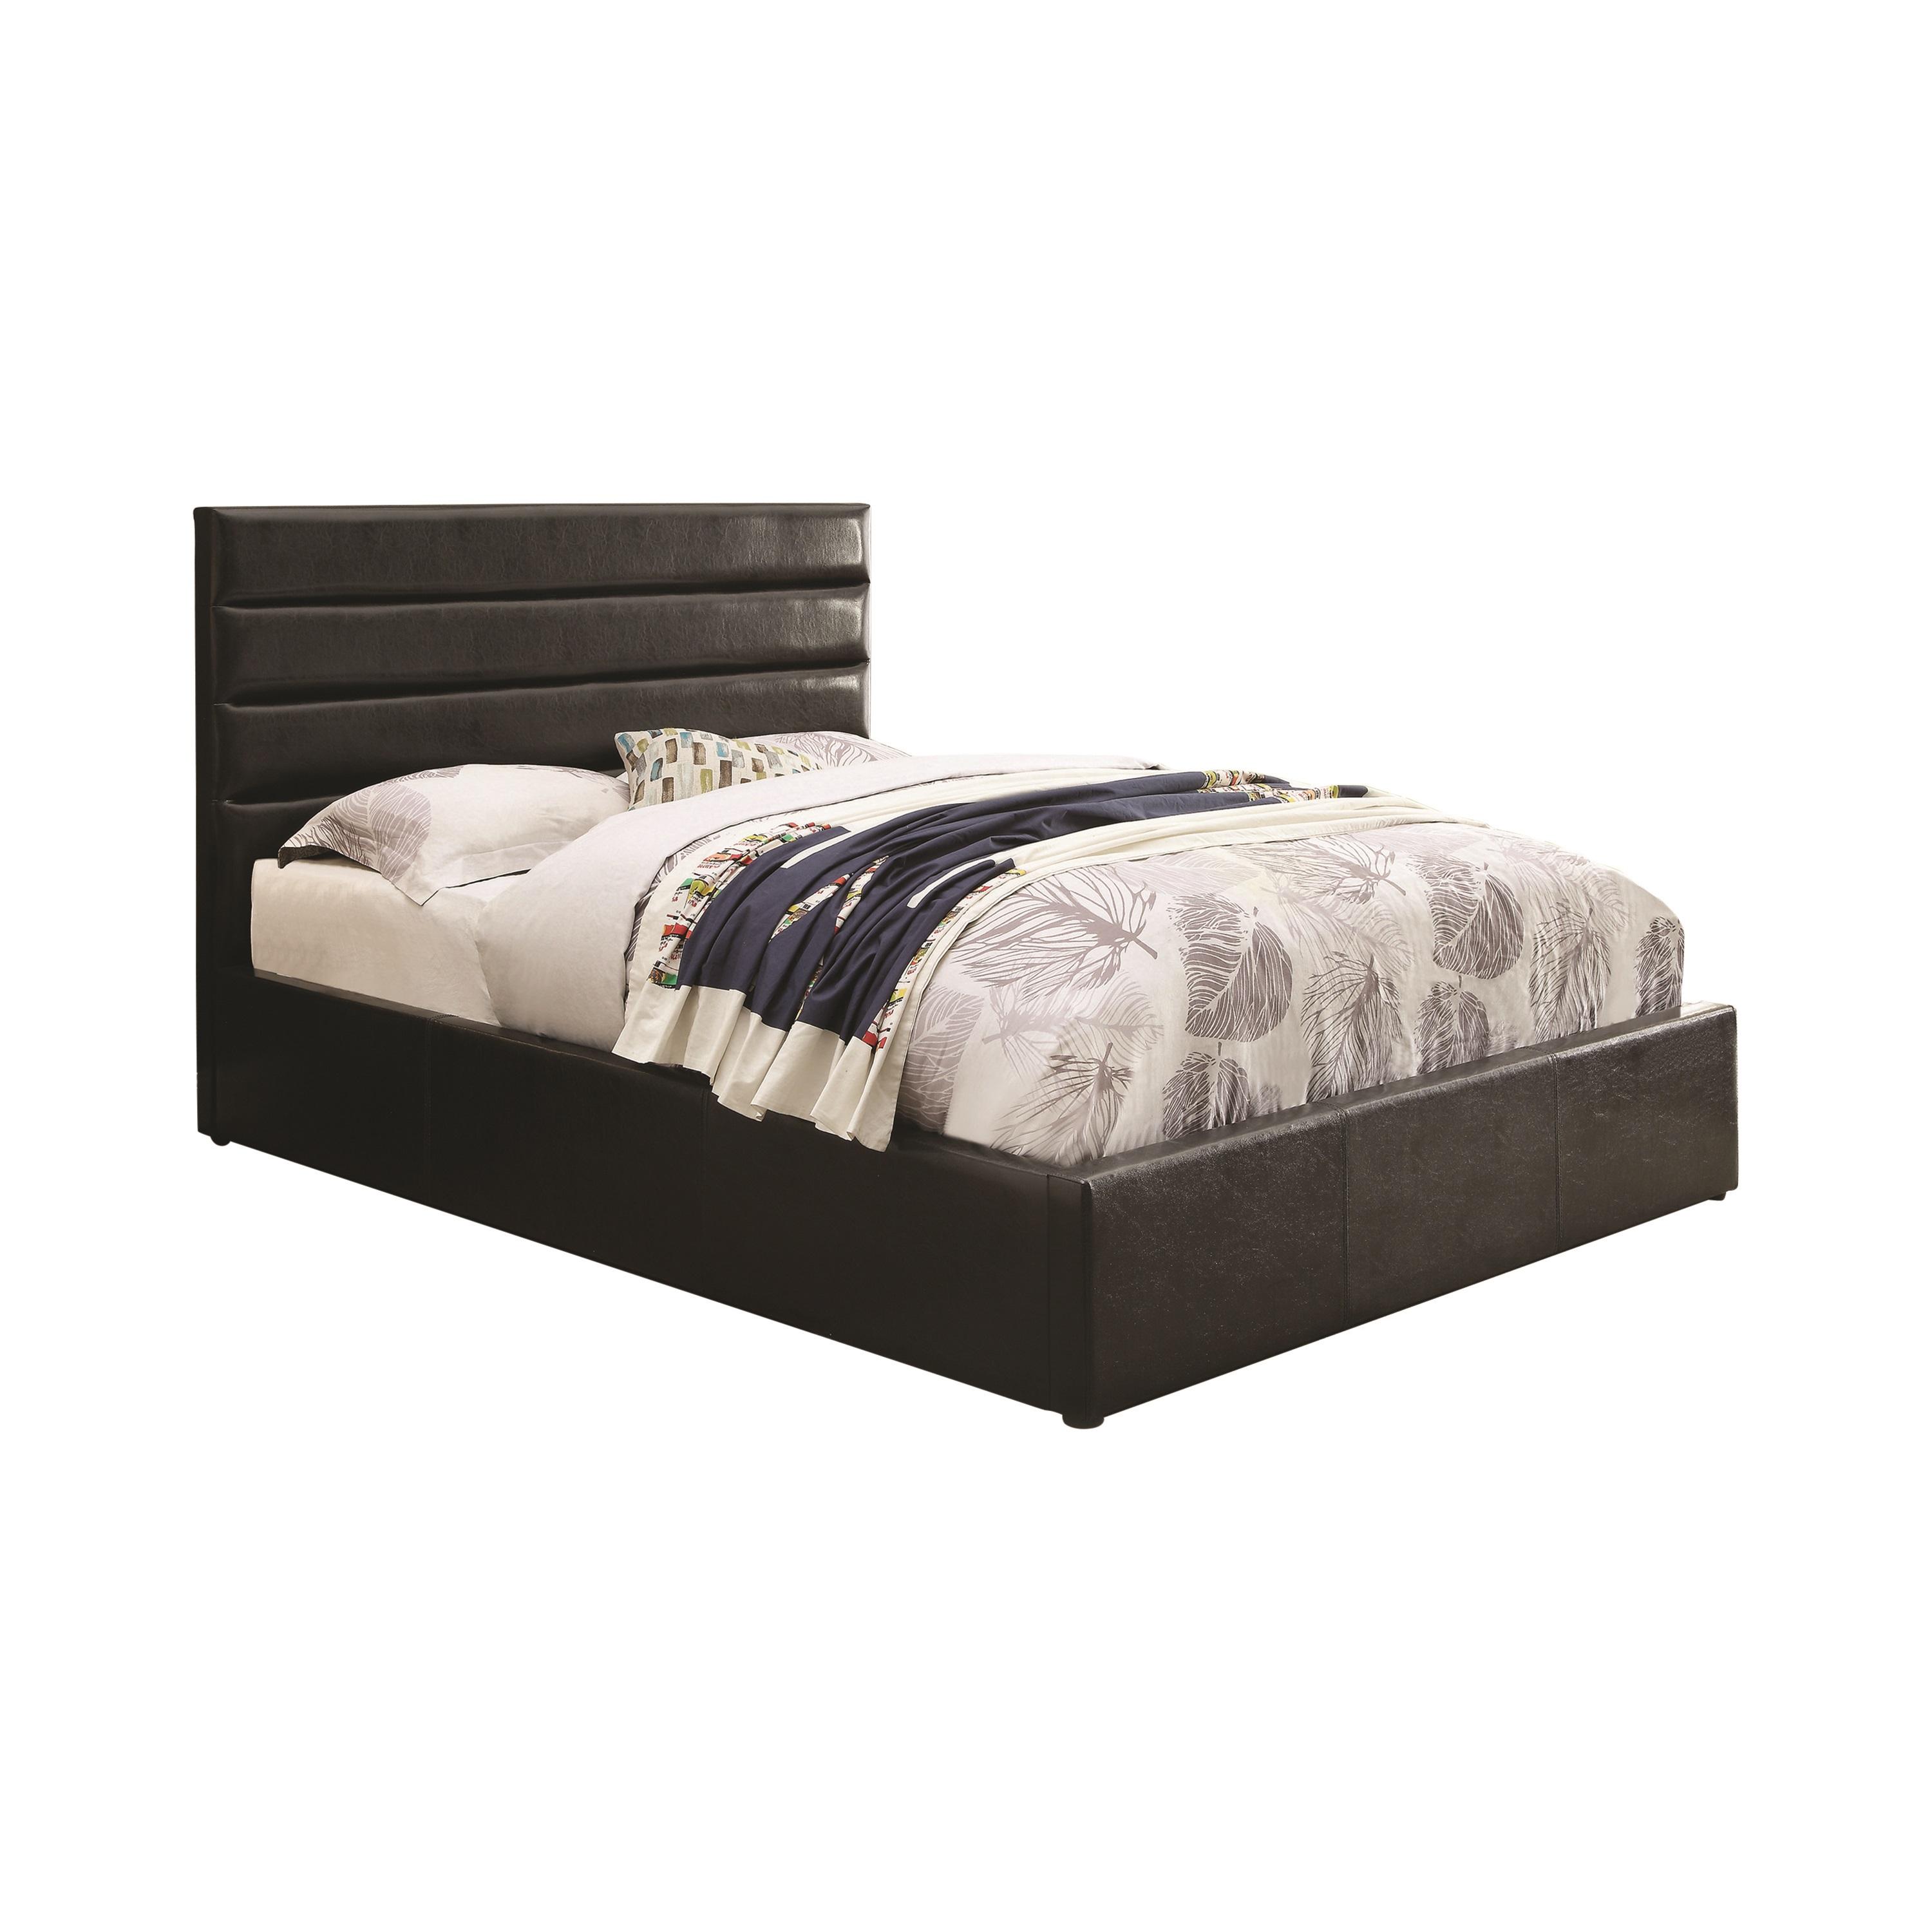 Contemporary Bed 300469F Riverbend 300469F in Black Leatherette